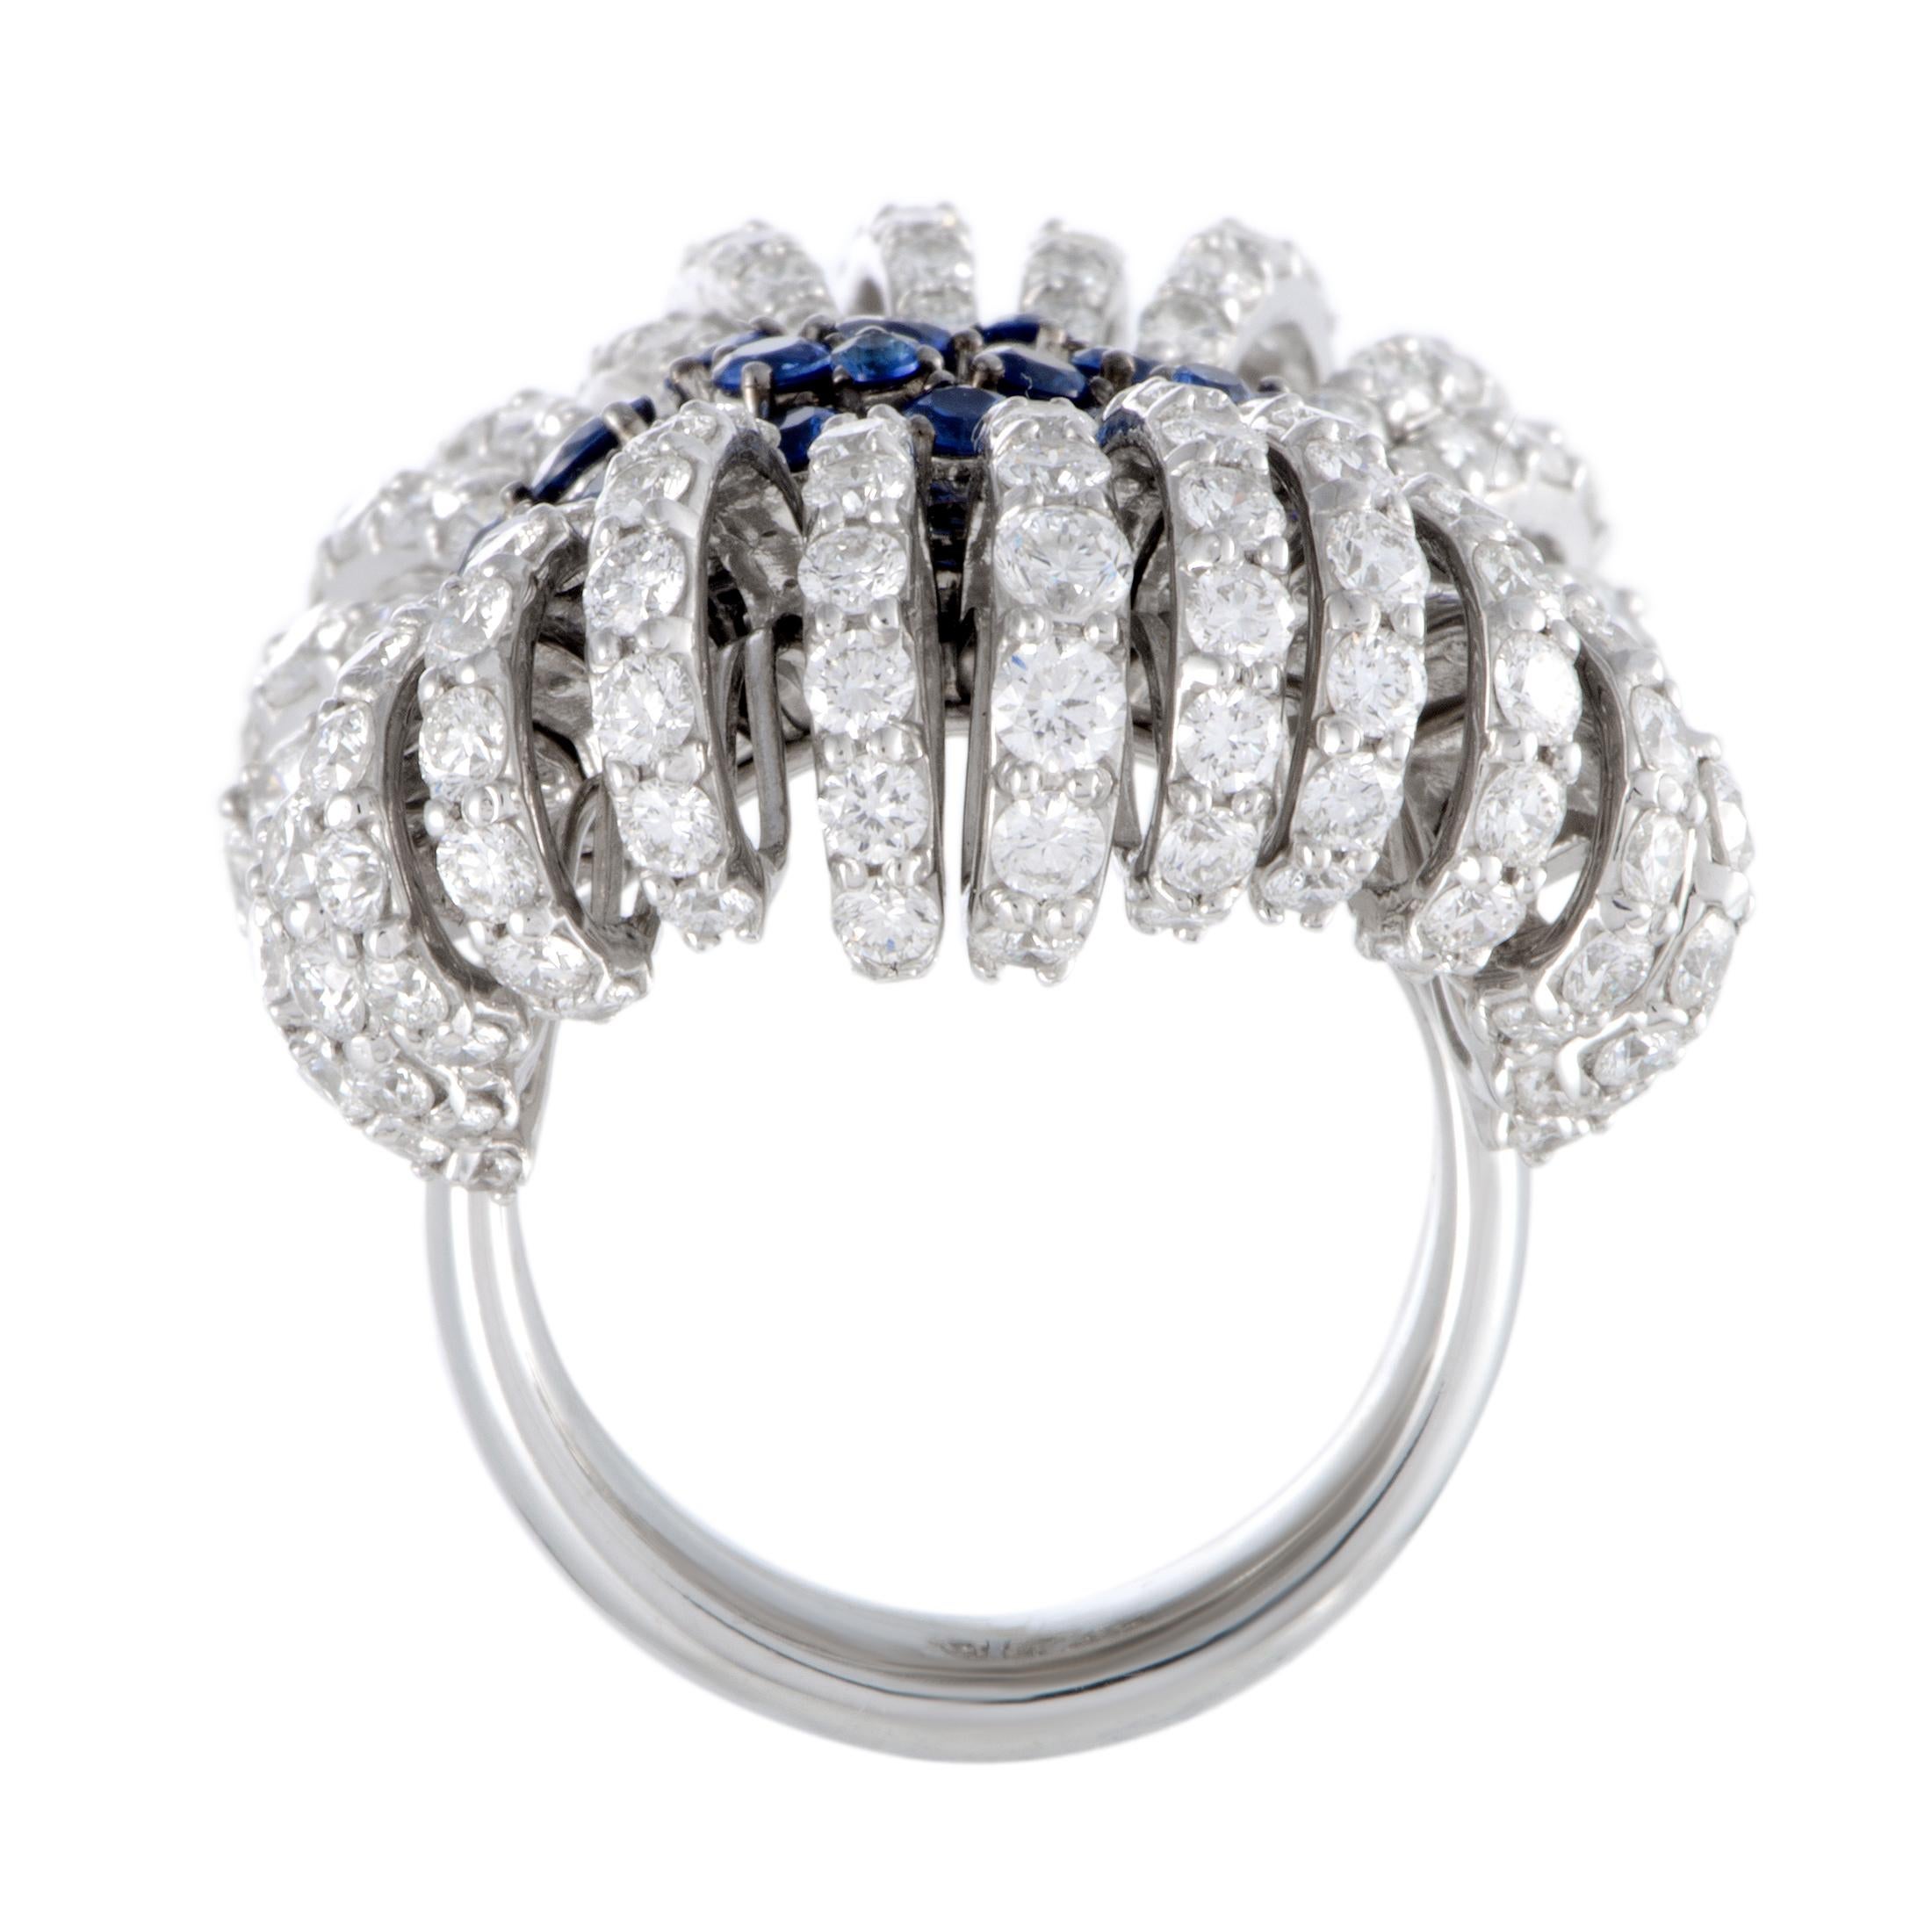 Stefan Hafner merged the attractive appeal of contemporary design with the ever-enticing allure of classic extravagance in this fabulous jewelry piece that compels with its lustrous gemstone décor. The ring is beautifully made of elegant 18K white